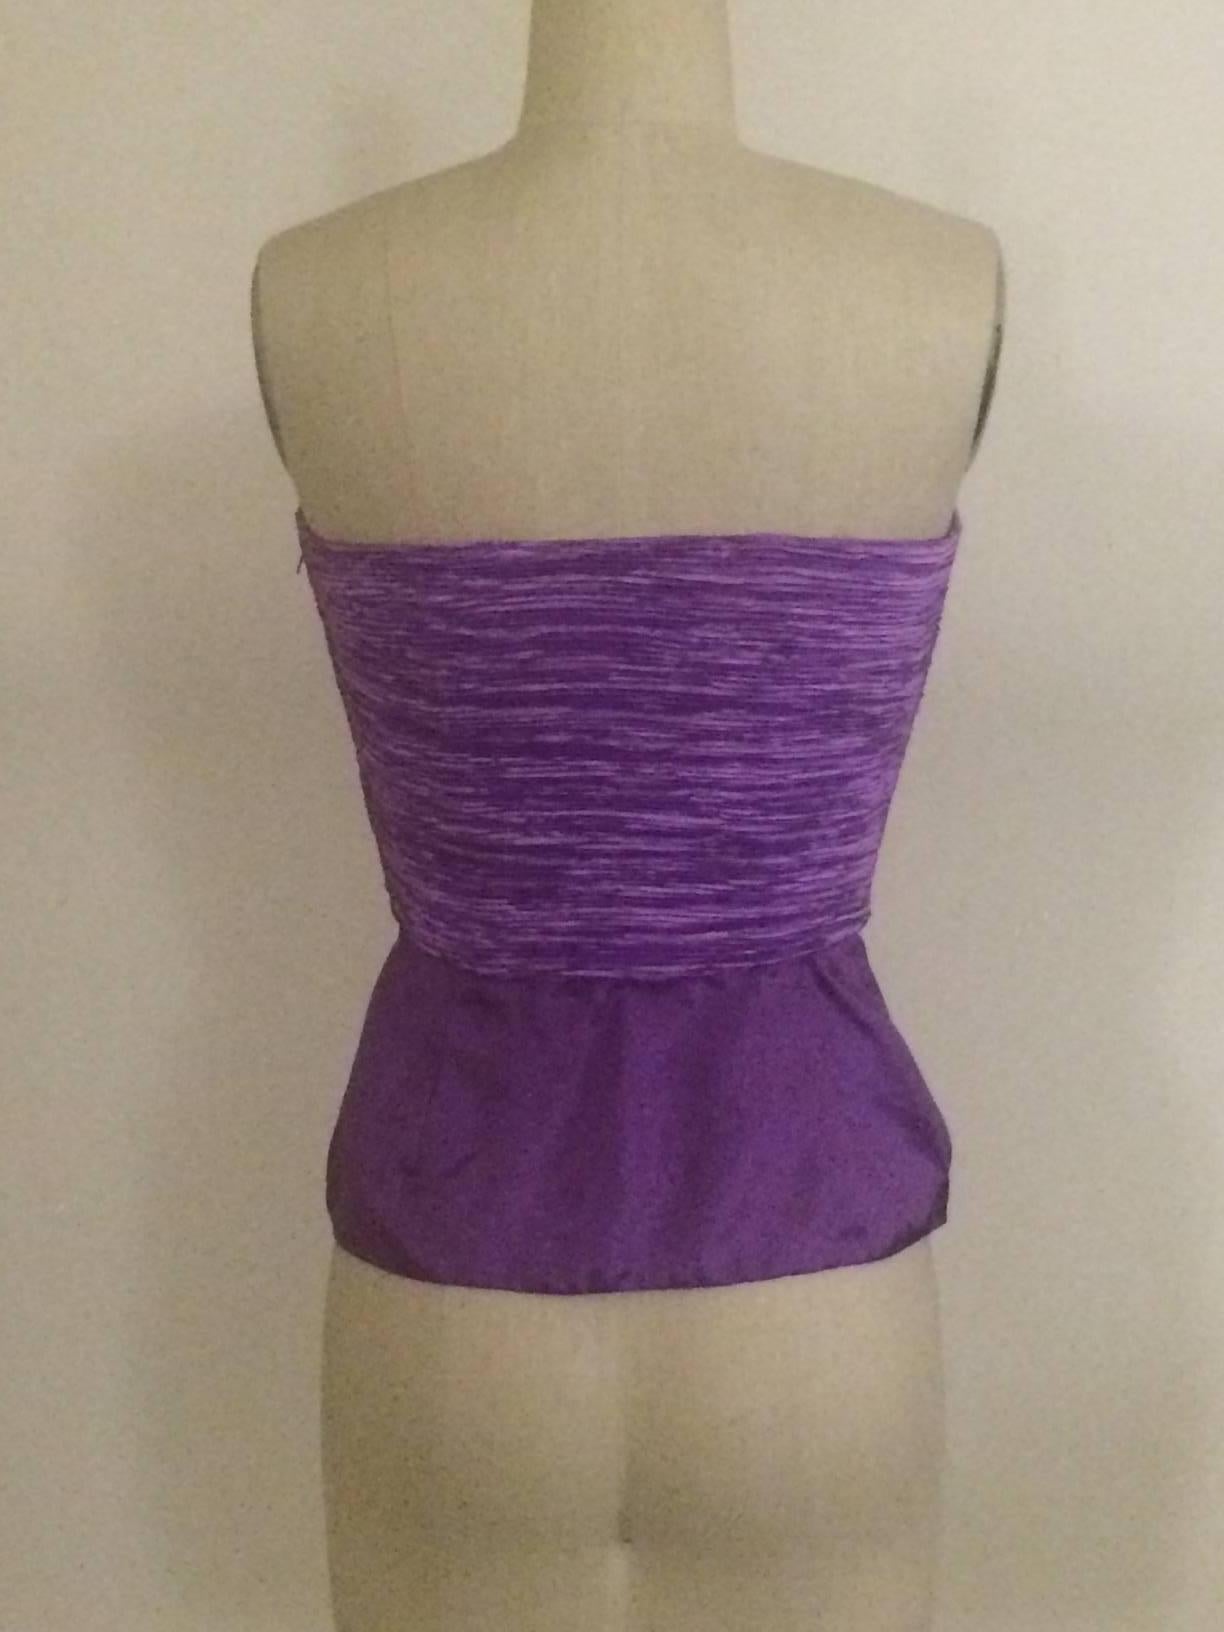 Mary McFadden Couture for Saks Fifth Avenue early 1990s purple strapless signature pleat top with peplum bottom. Boning at top. Side zip.

100% polyester.

Made in USA.

Size 2, fits like modern 0. See measurements.
Bust 31